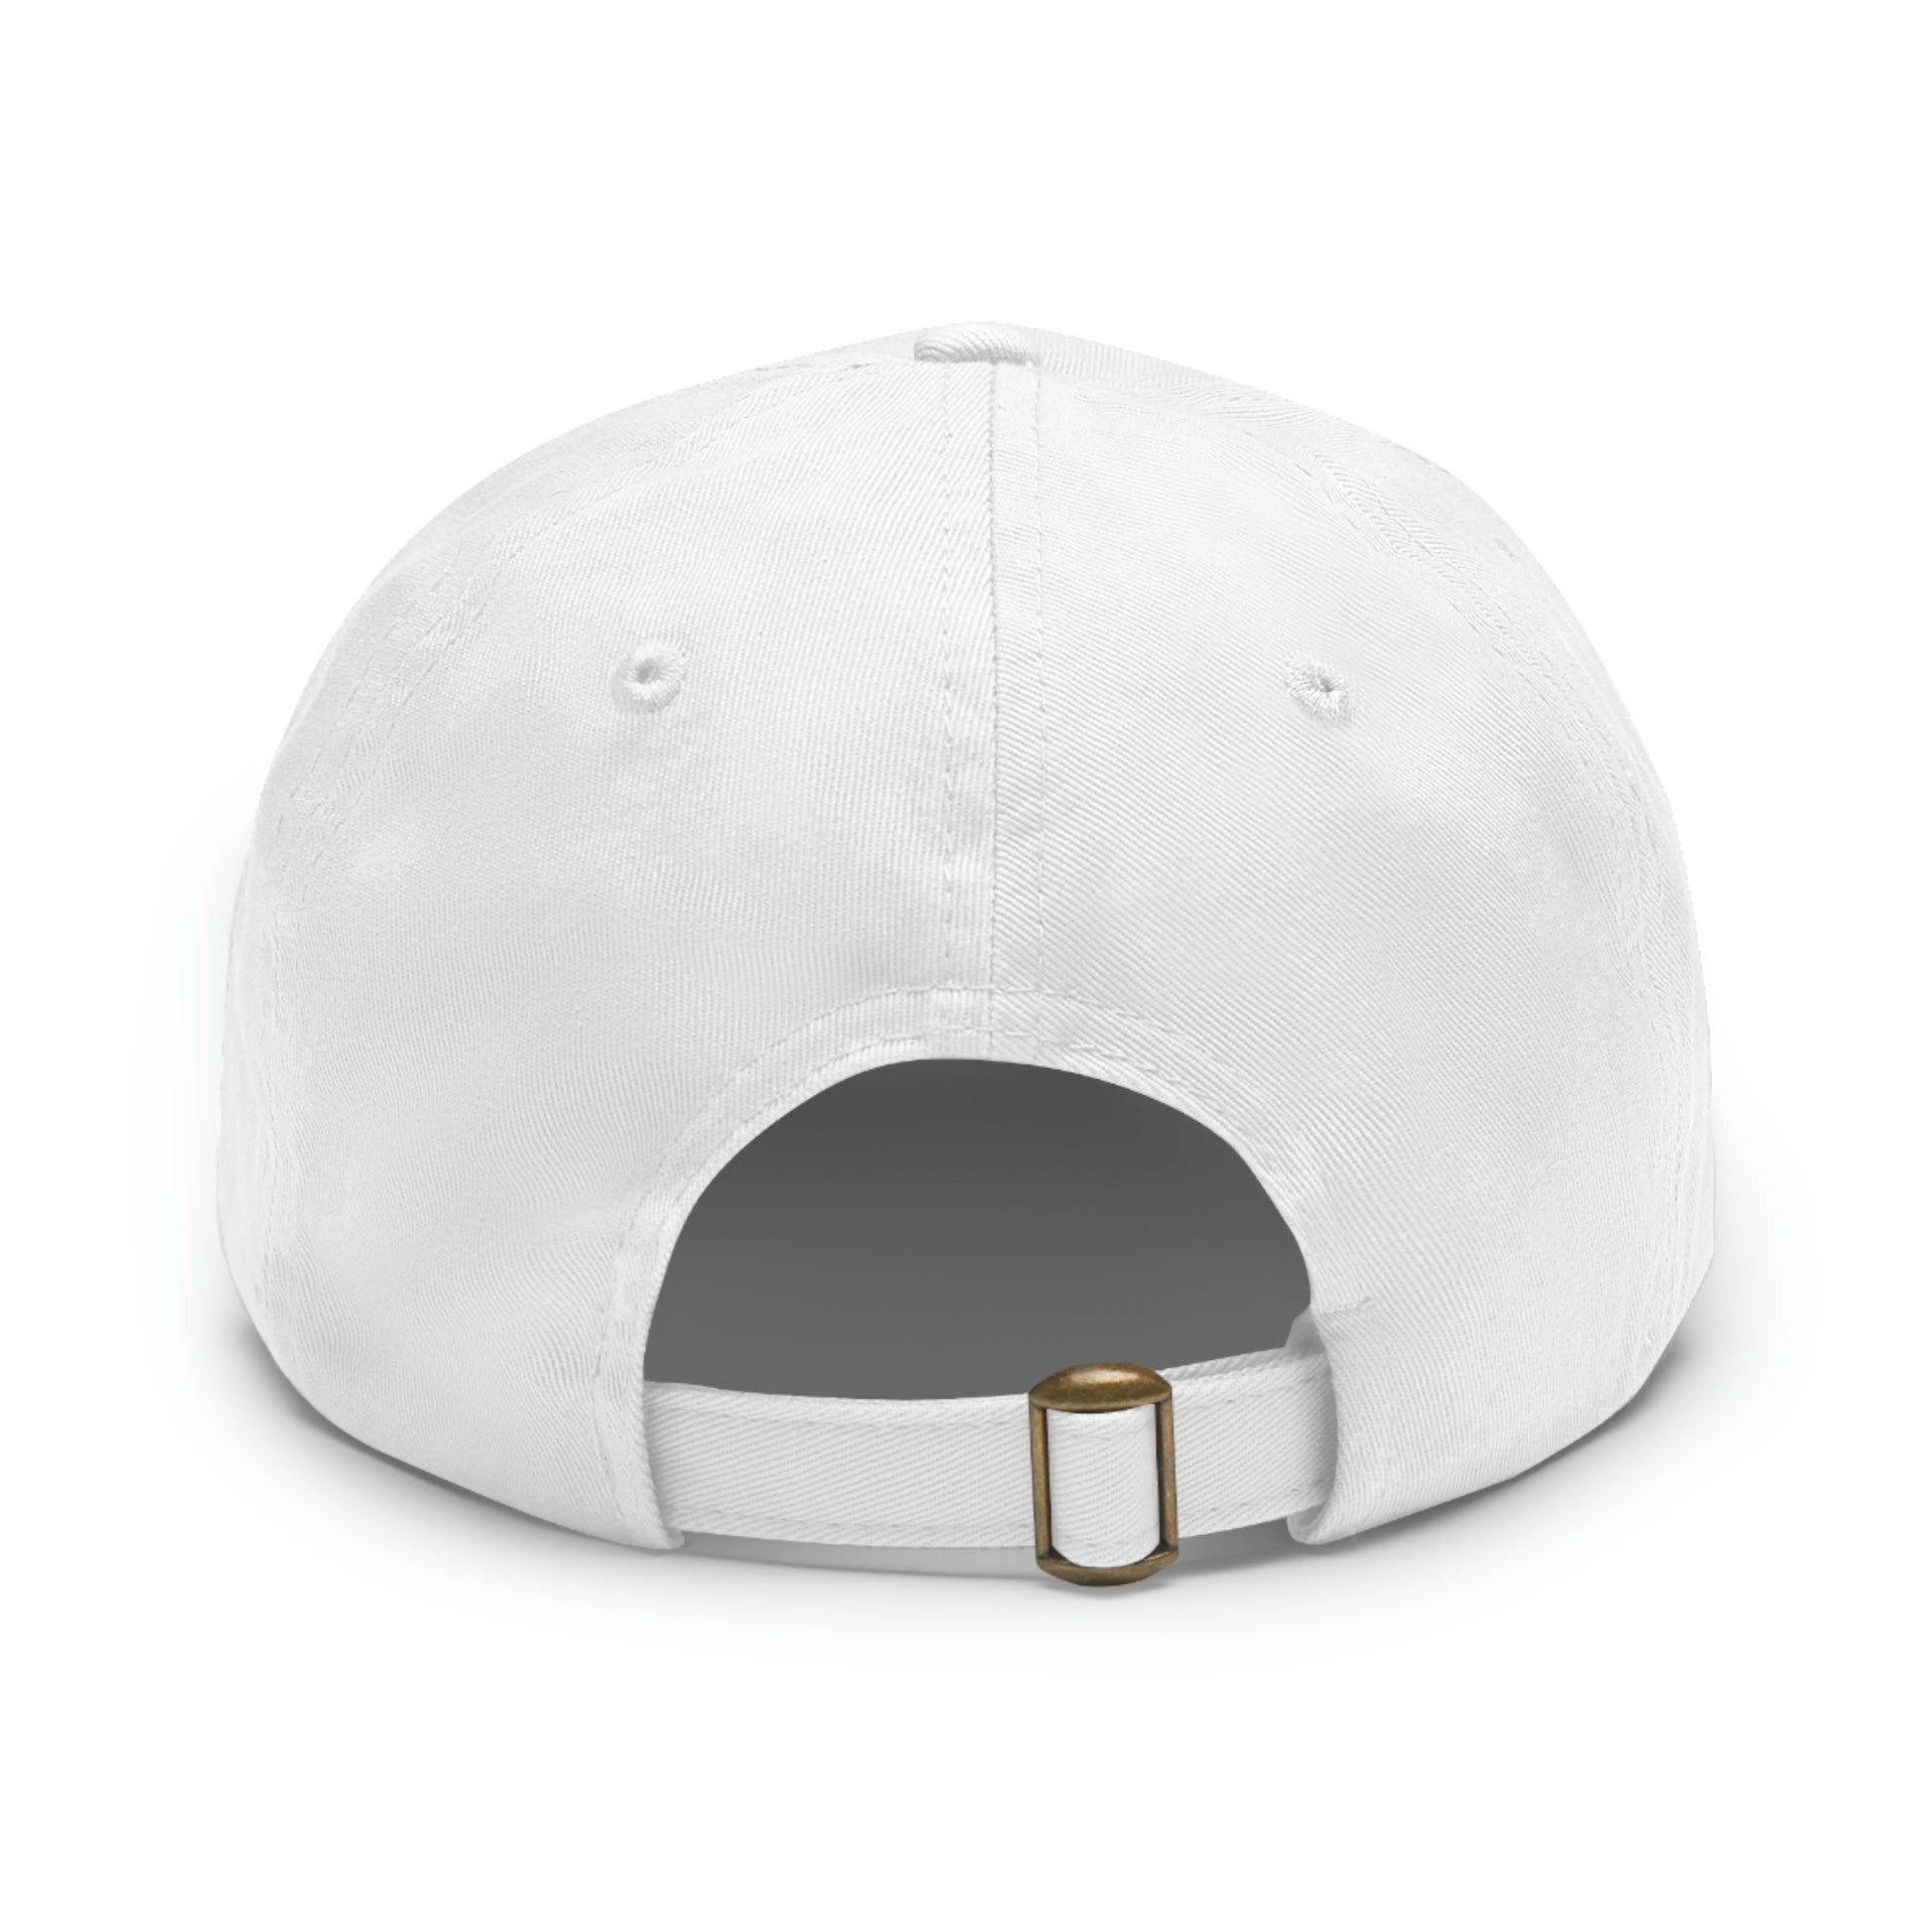 Miami Vibes Cap White / Black patch Rectangle One size